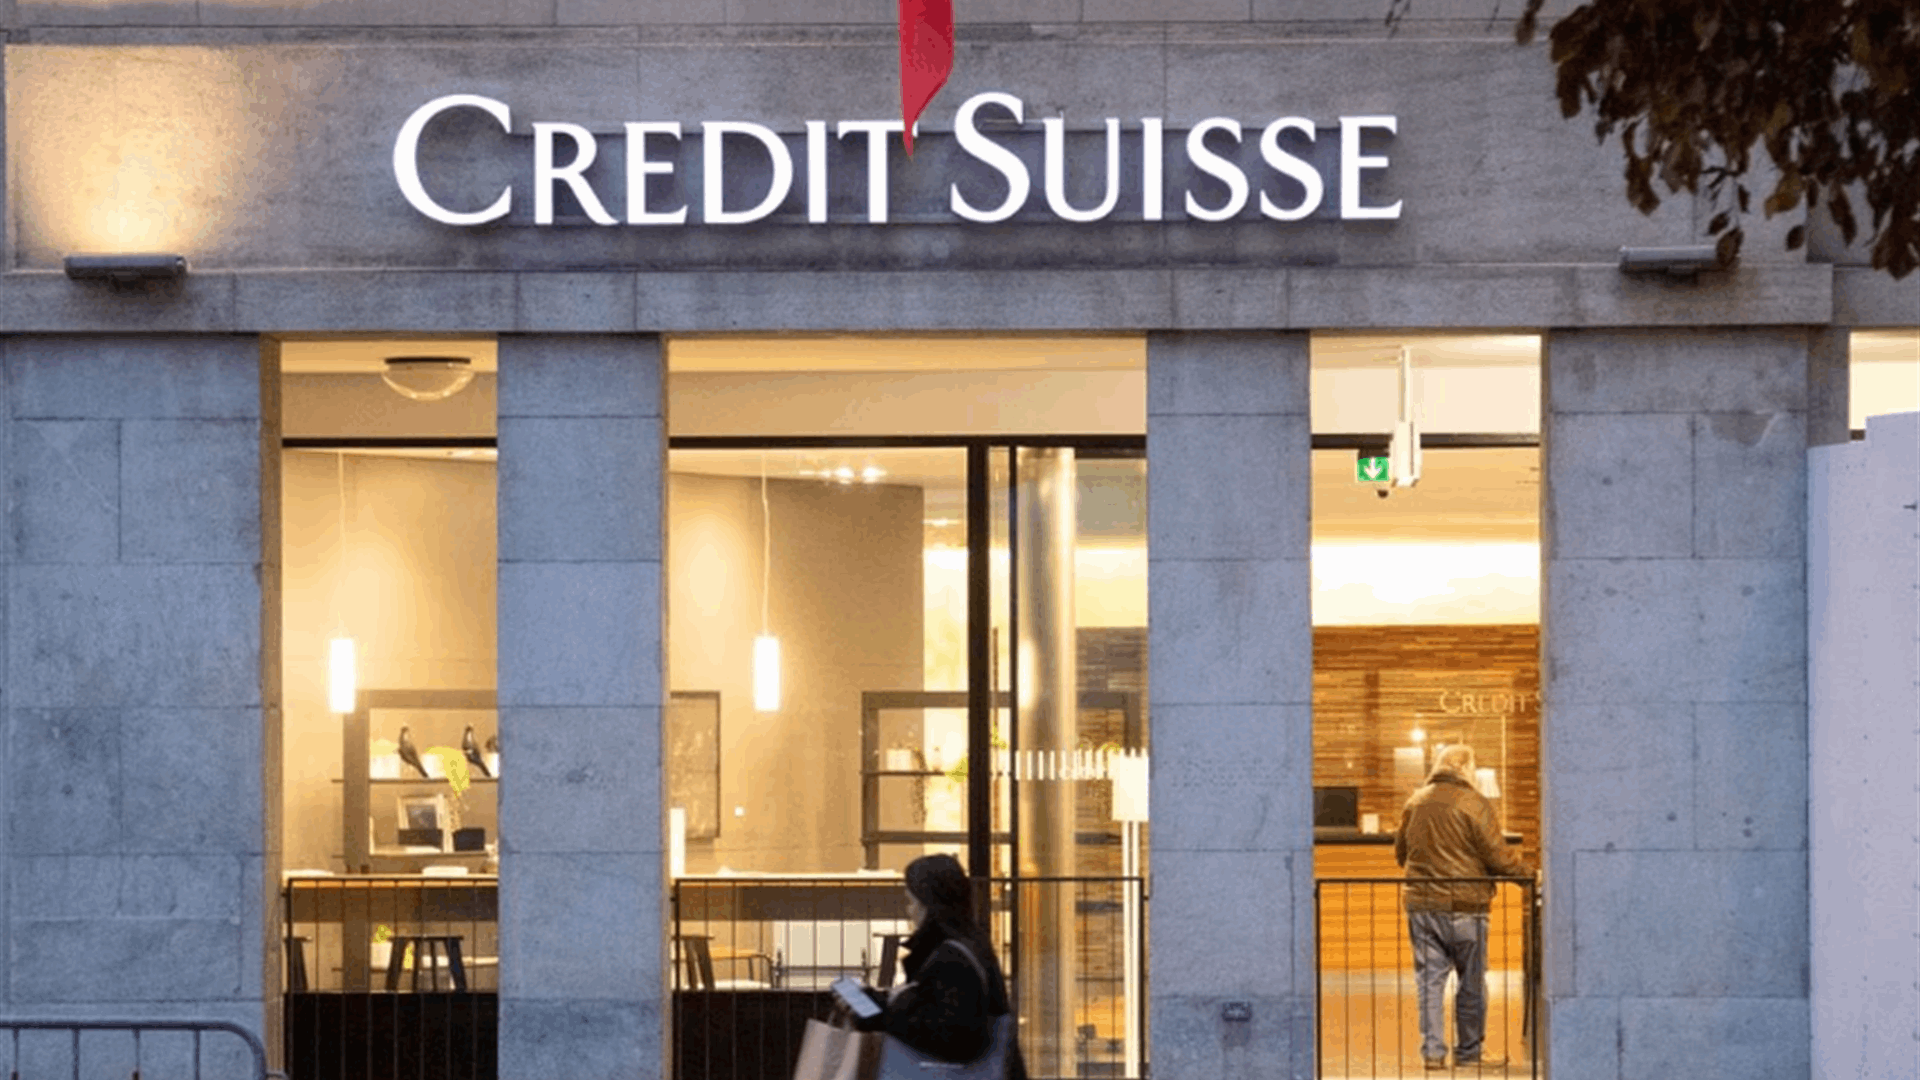 Qatar Investment Authority raises stake in Credit Suisse to just under 7 percent